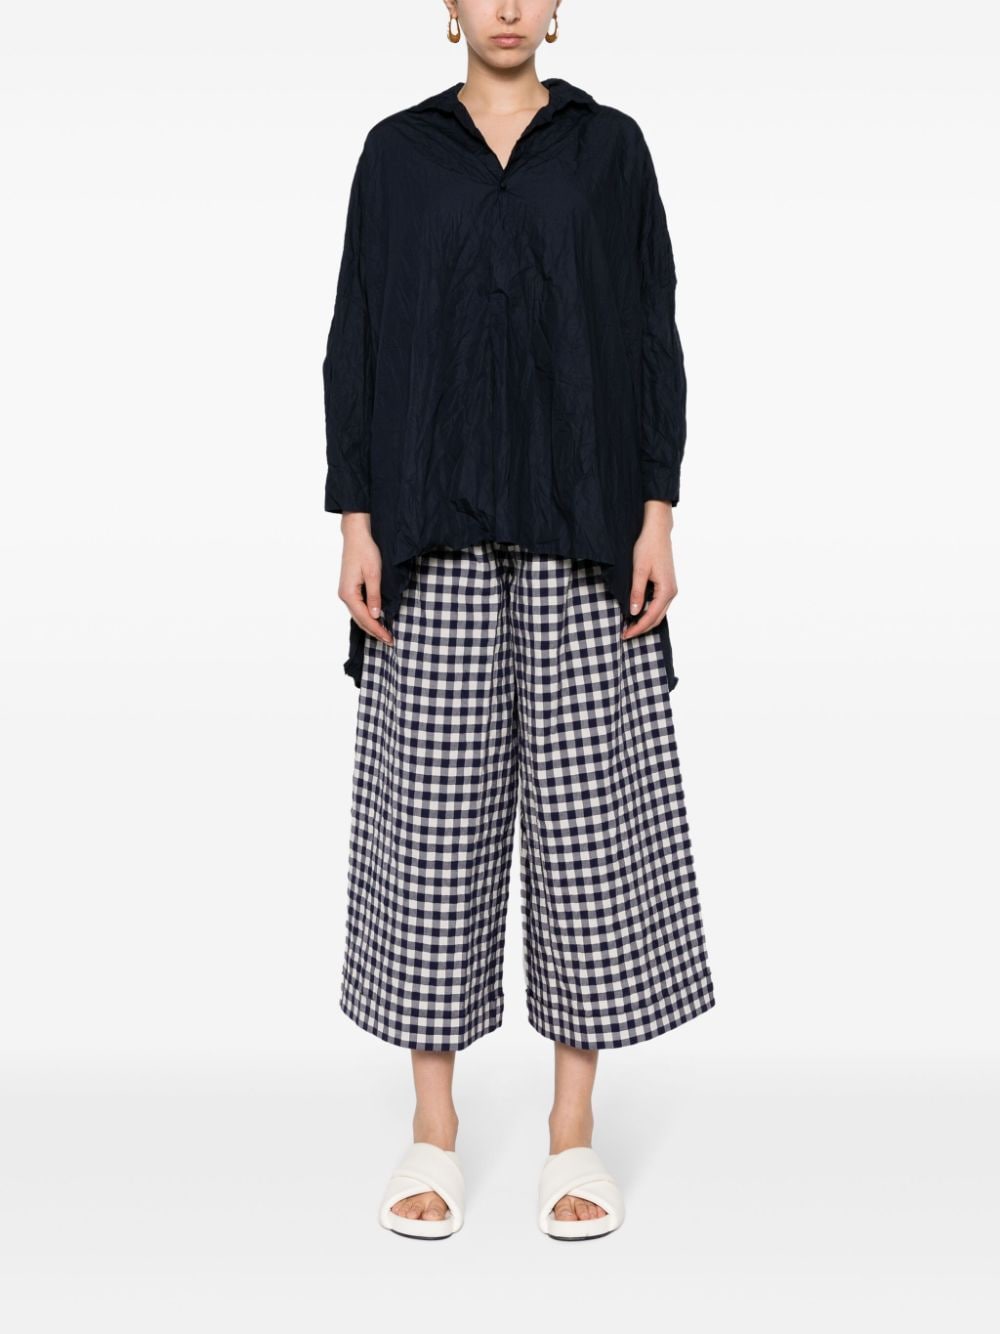 DANIELA GREGIS Navy Blue Checkered High-Waisted Cotton Trousers for Women